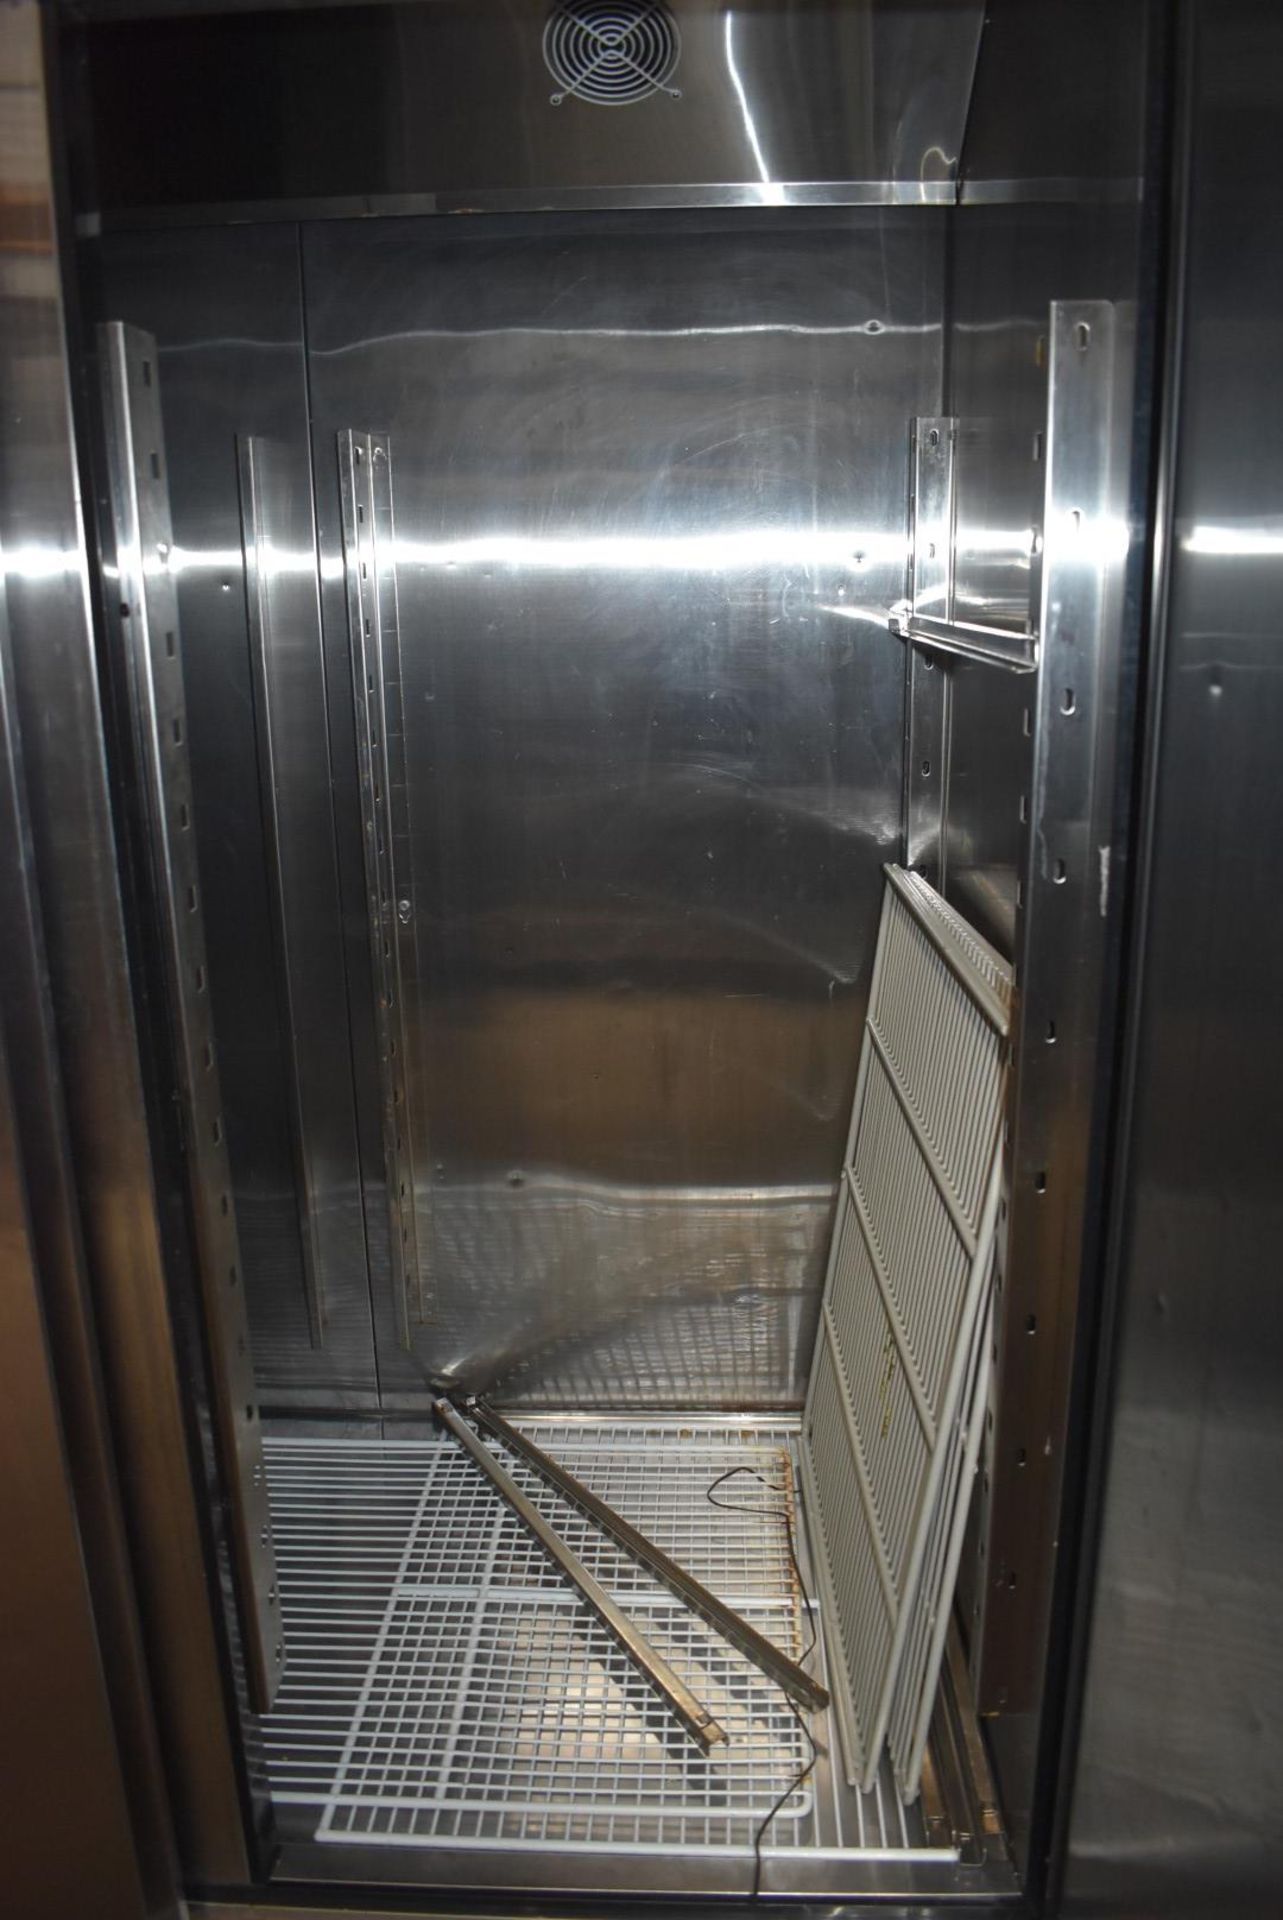 1 x Atosa Double Door Upright Refrigerator - Model MBL8960 - Recently Removed From a Restaurant - Image 8 of 12